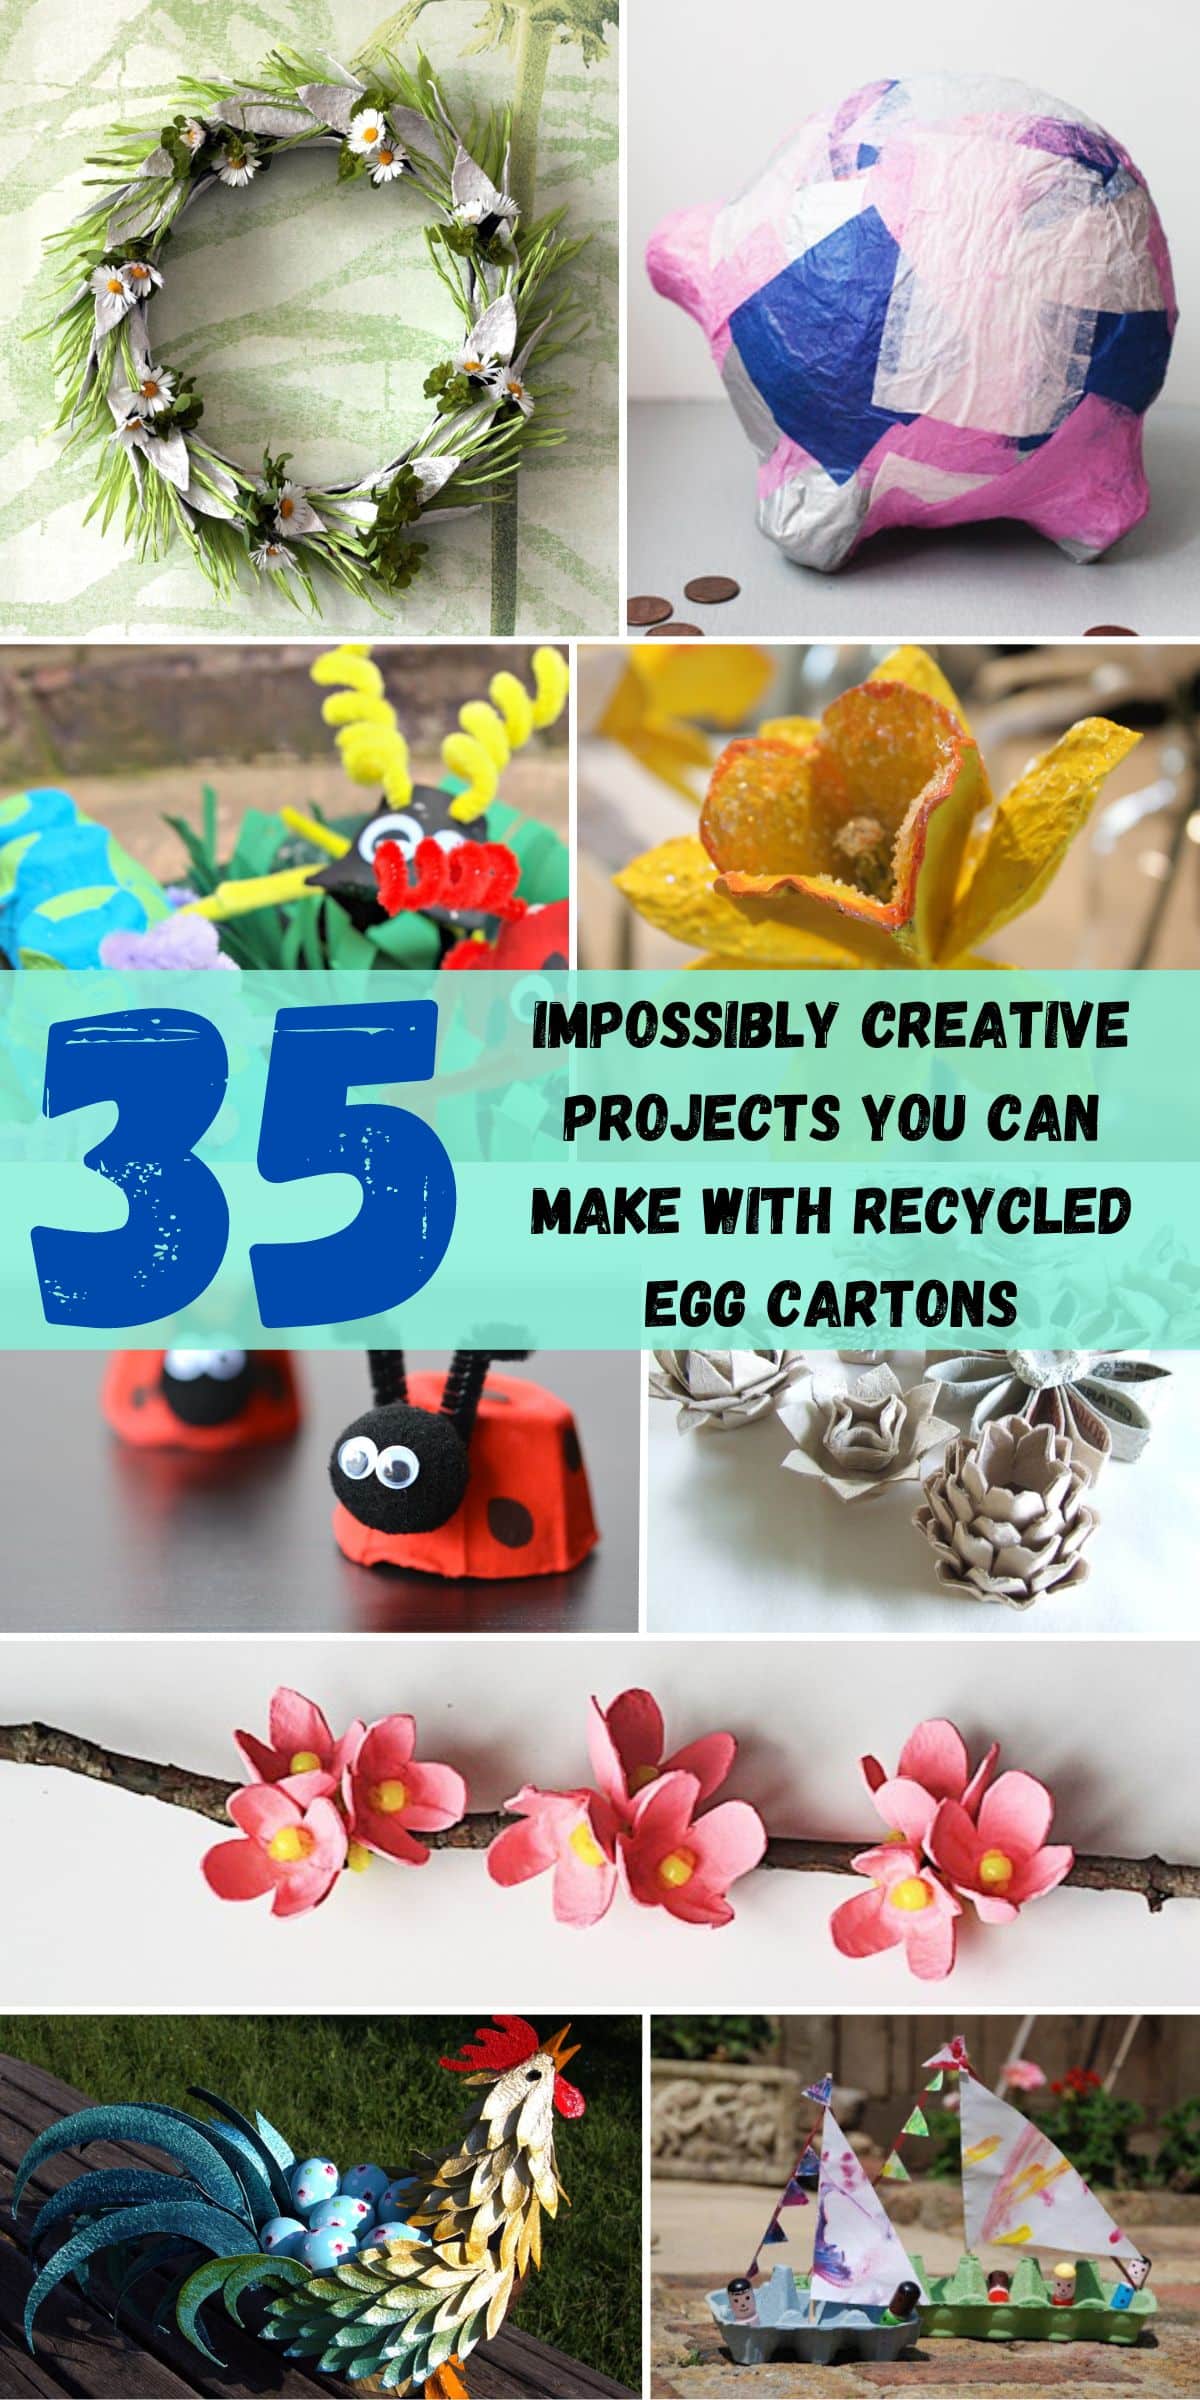 35 Impossibly Creative Projects You Can Make with Recycled Egg Cartons collage.